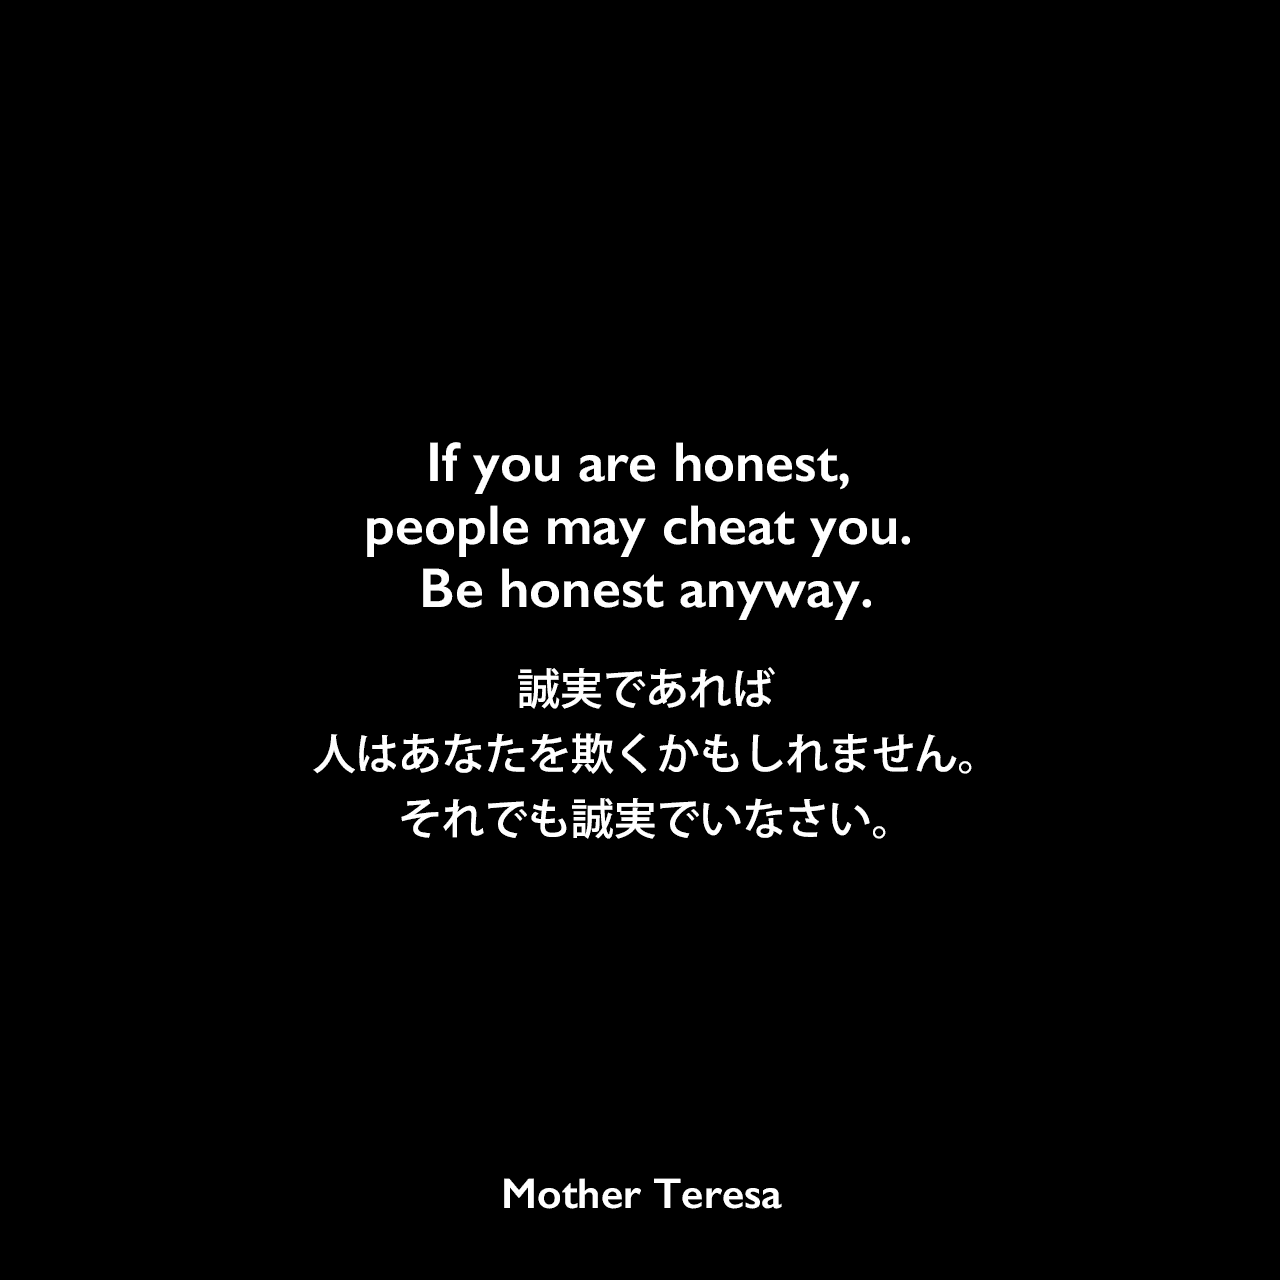 If you are honest, people may cheat you. Be honest anyway.誠実であれば、人はあなたを欺くかもしれません。それでも誠実でいなさい。Mother Teresa